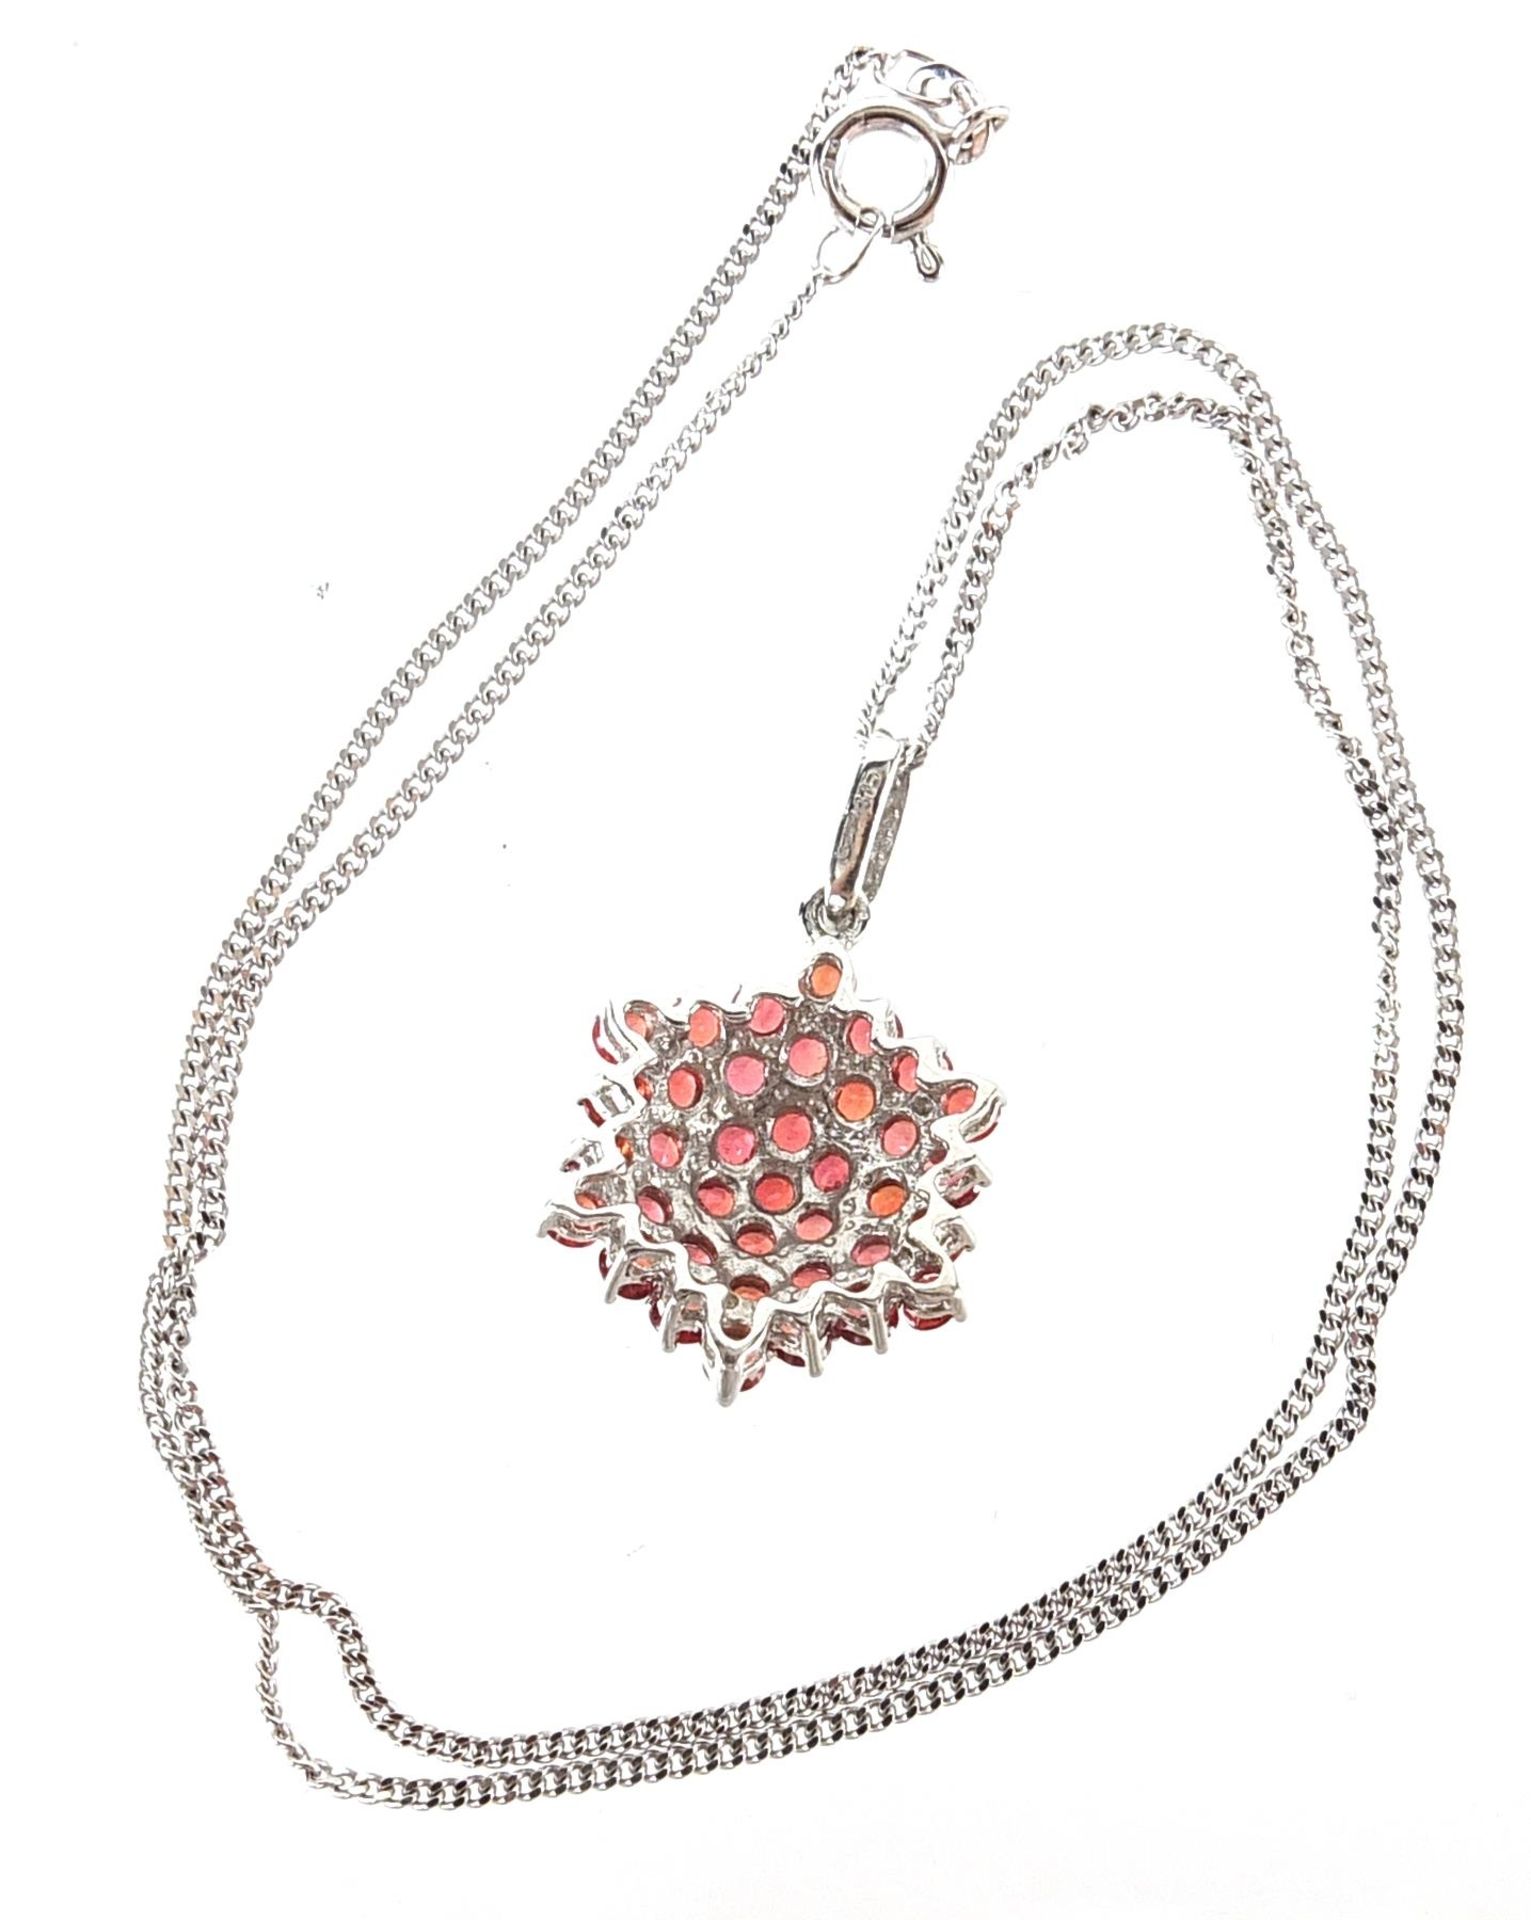 9ct white gold garnet and diamond cluster pendant on a 9ct white gold necklace, 2.9cm high and - Image 3 of 3